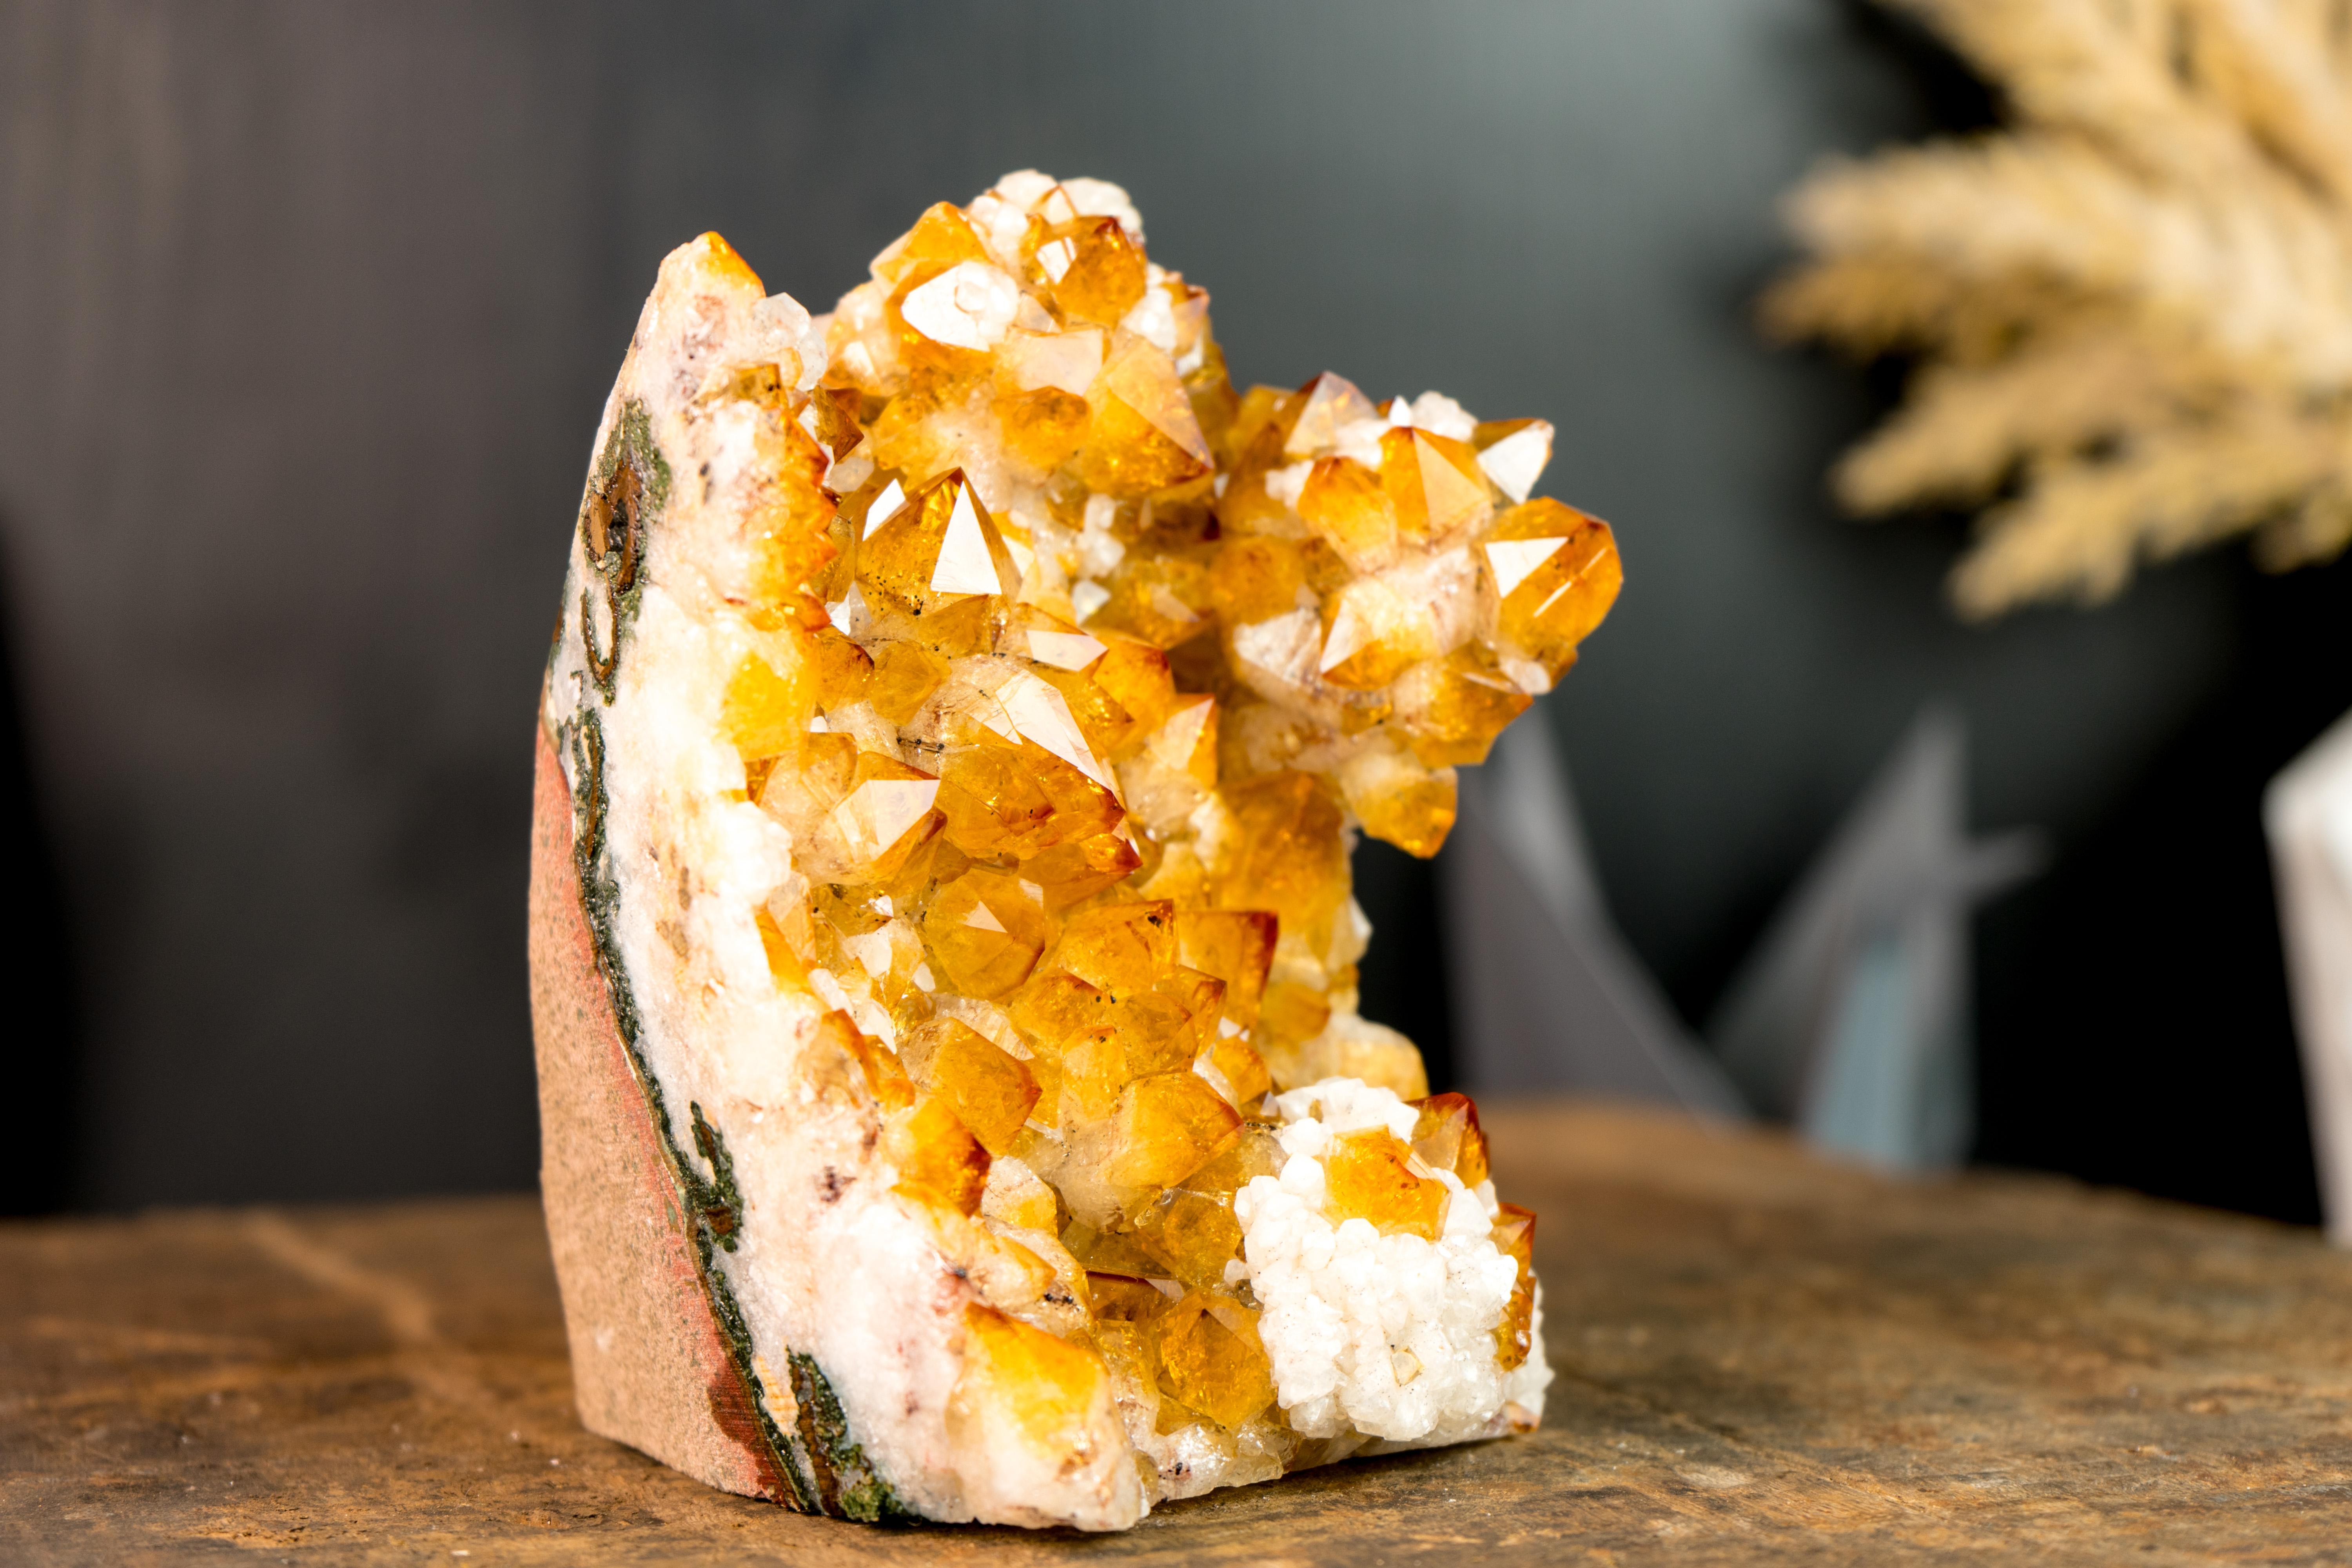 Contemporary Golden Orange Citrine Crystal Cluster with Stalactite Flower and Calcite For Sale